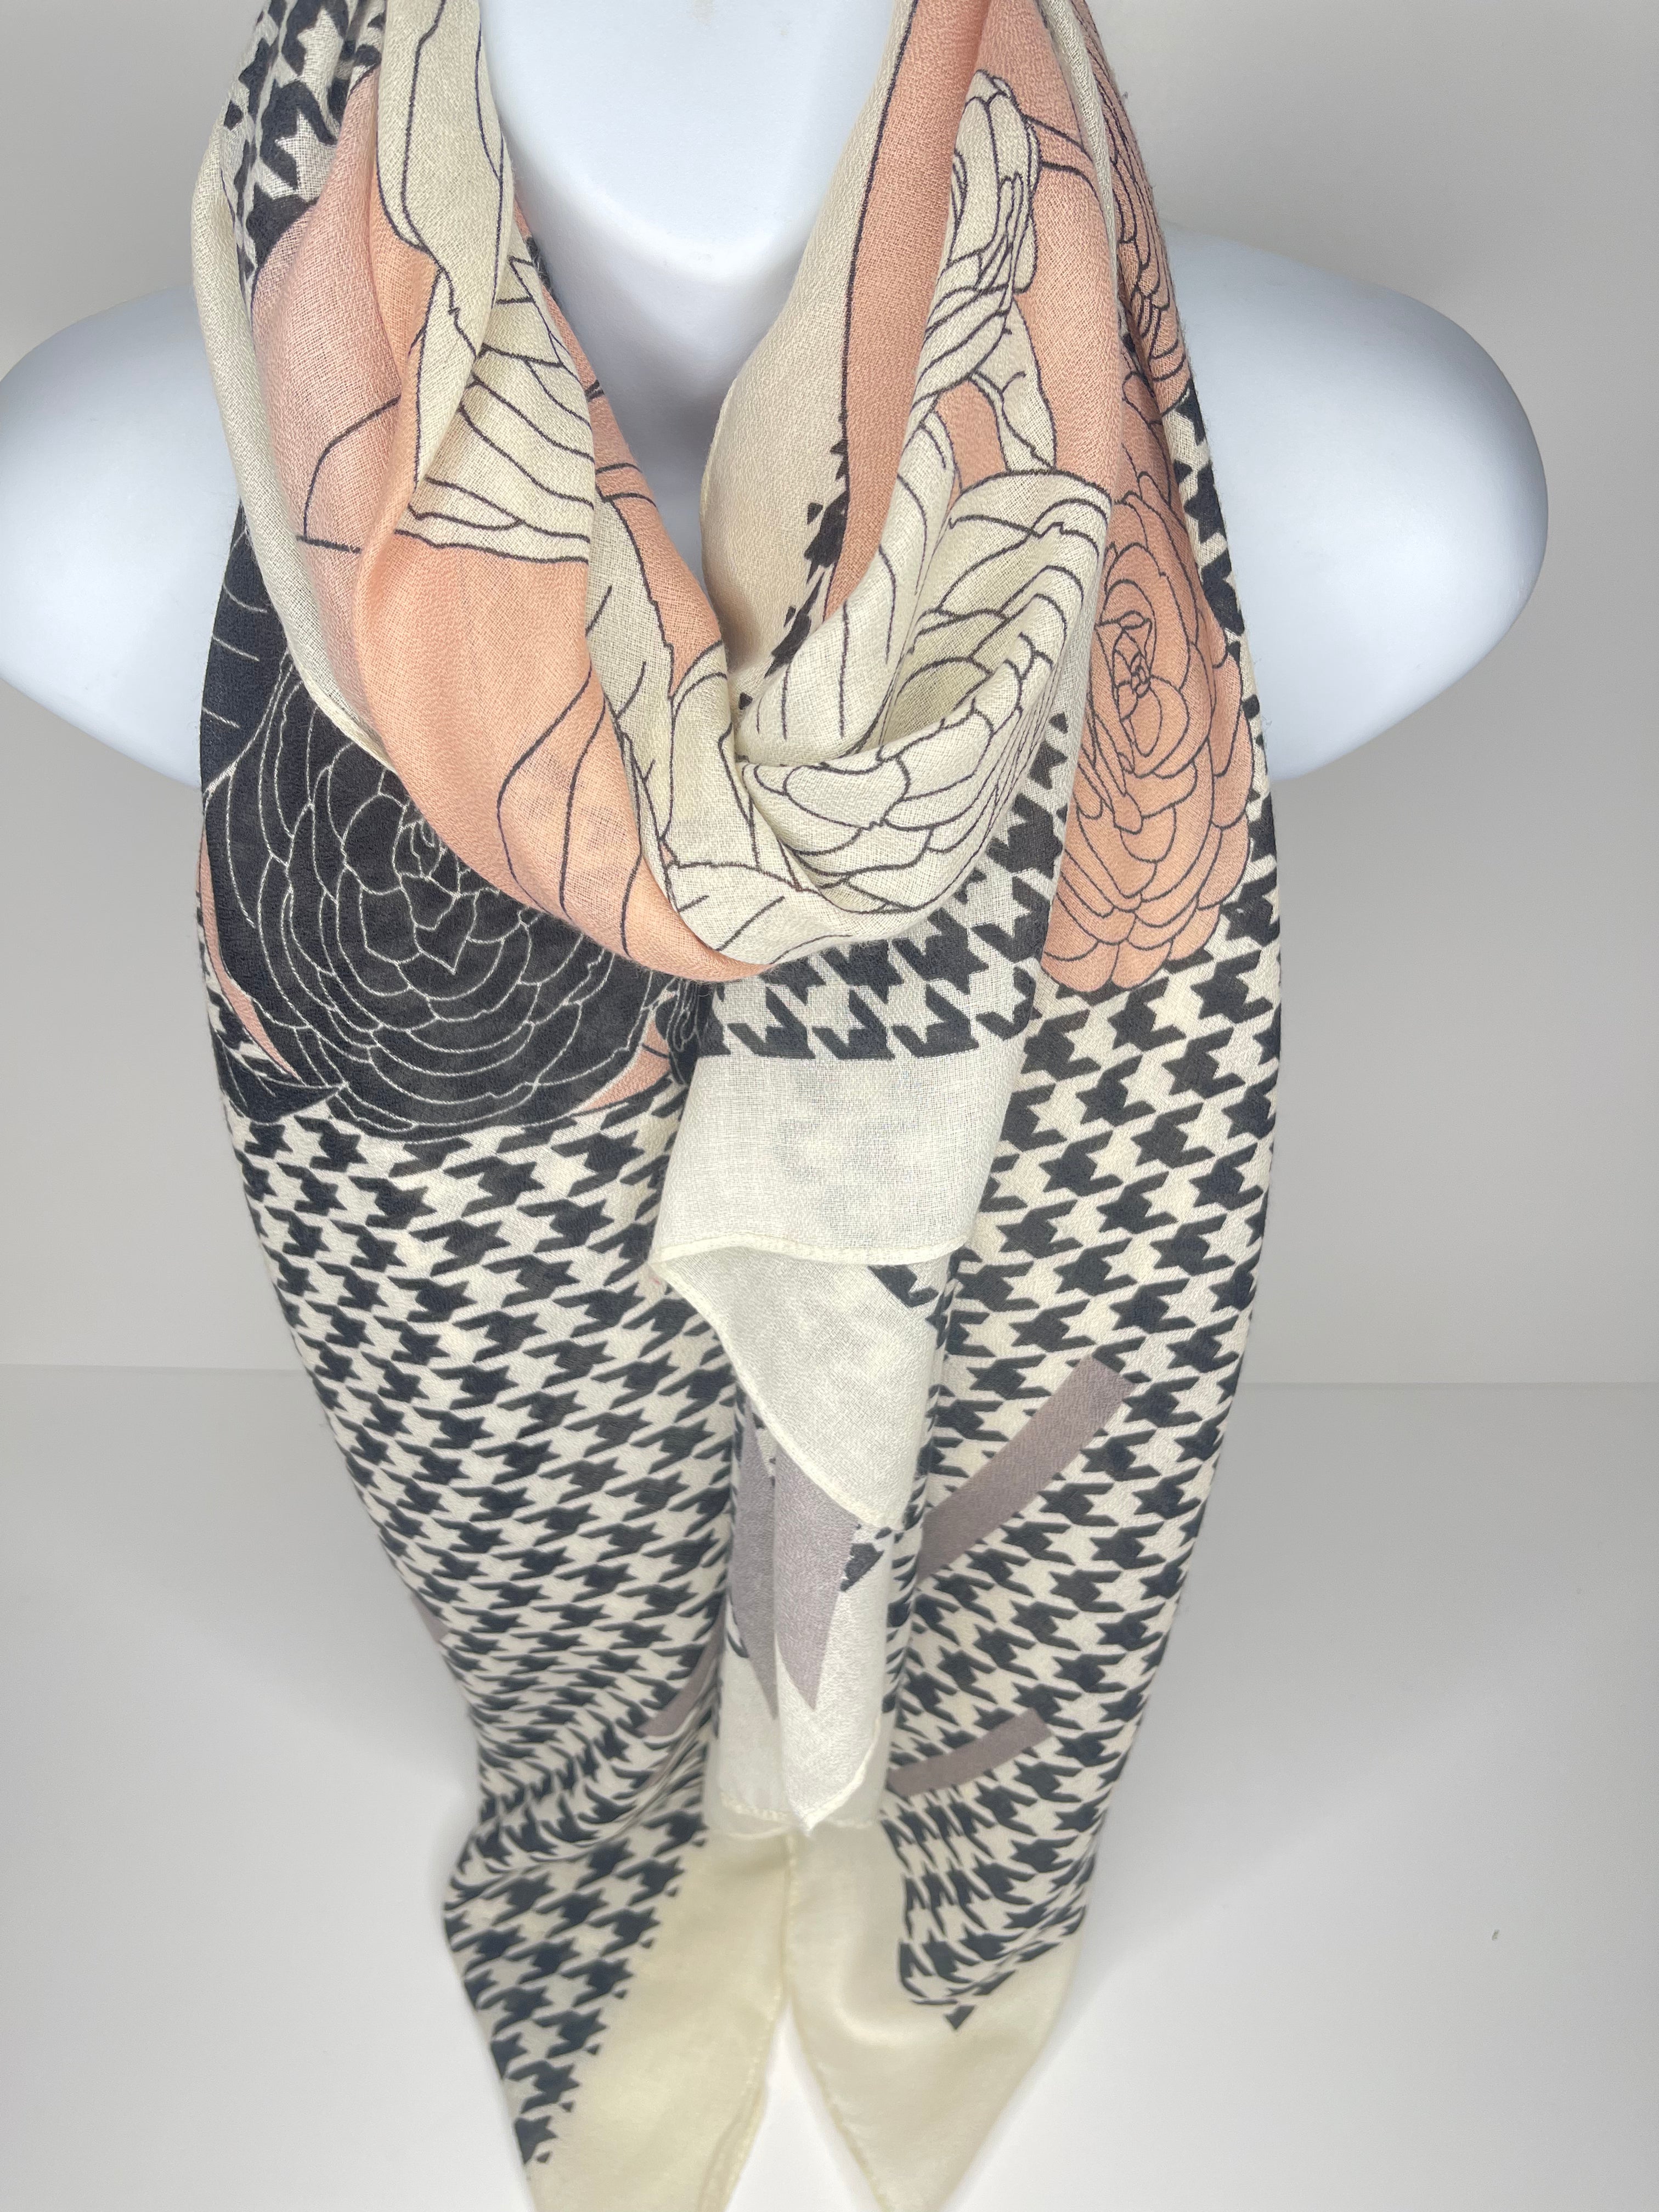 Peach, cream and black hounds-tooth print scarf